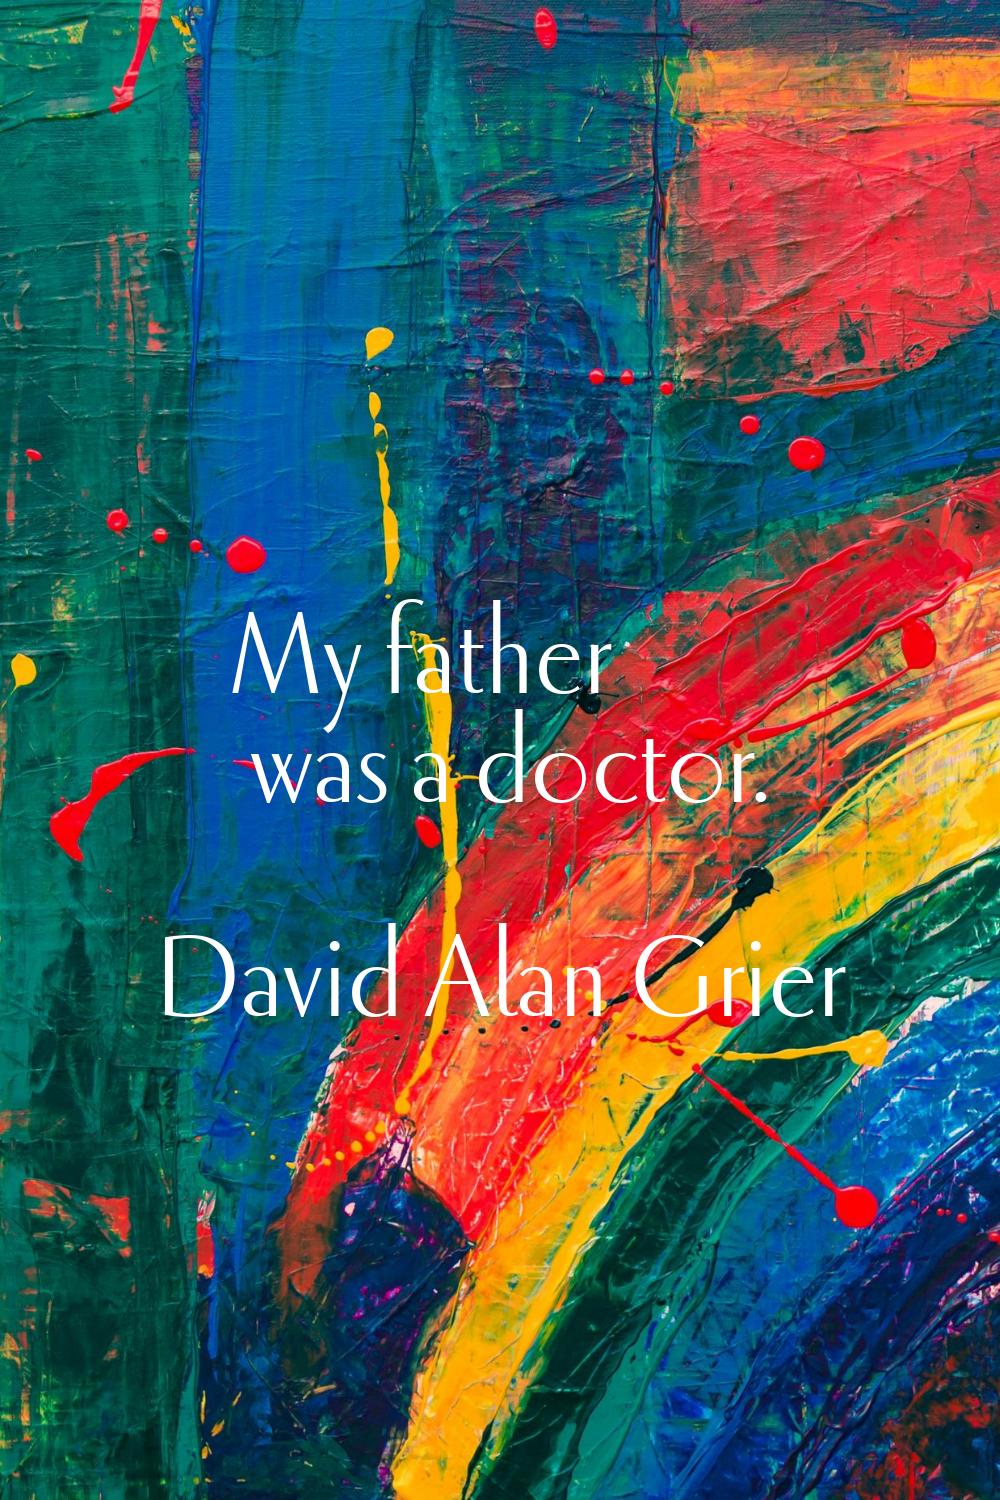 My father was a doctor.